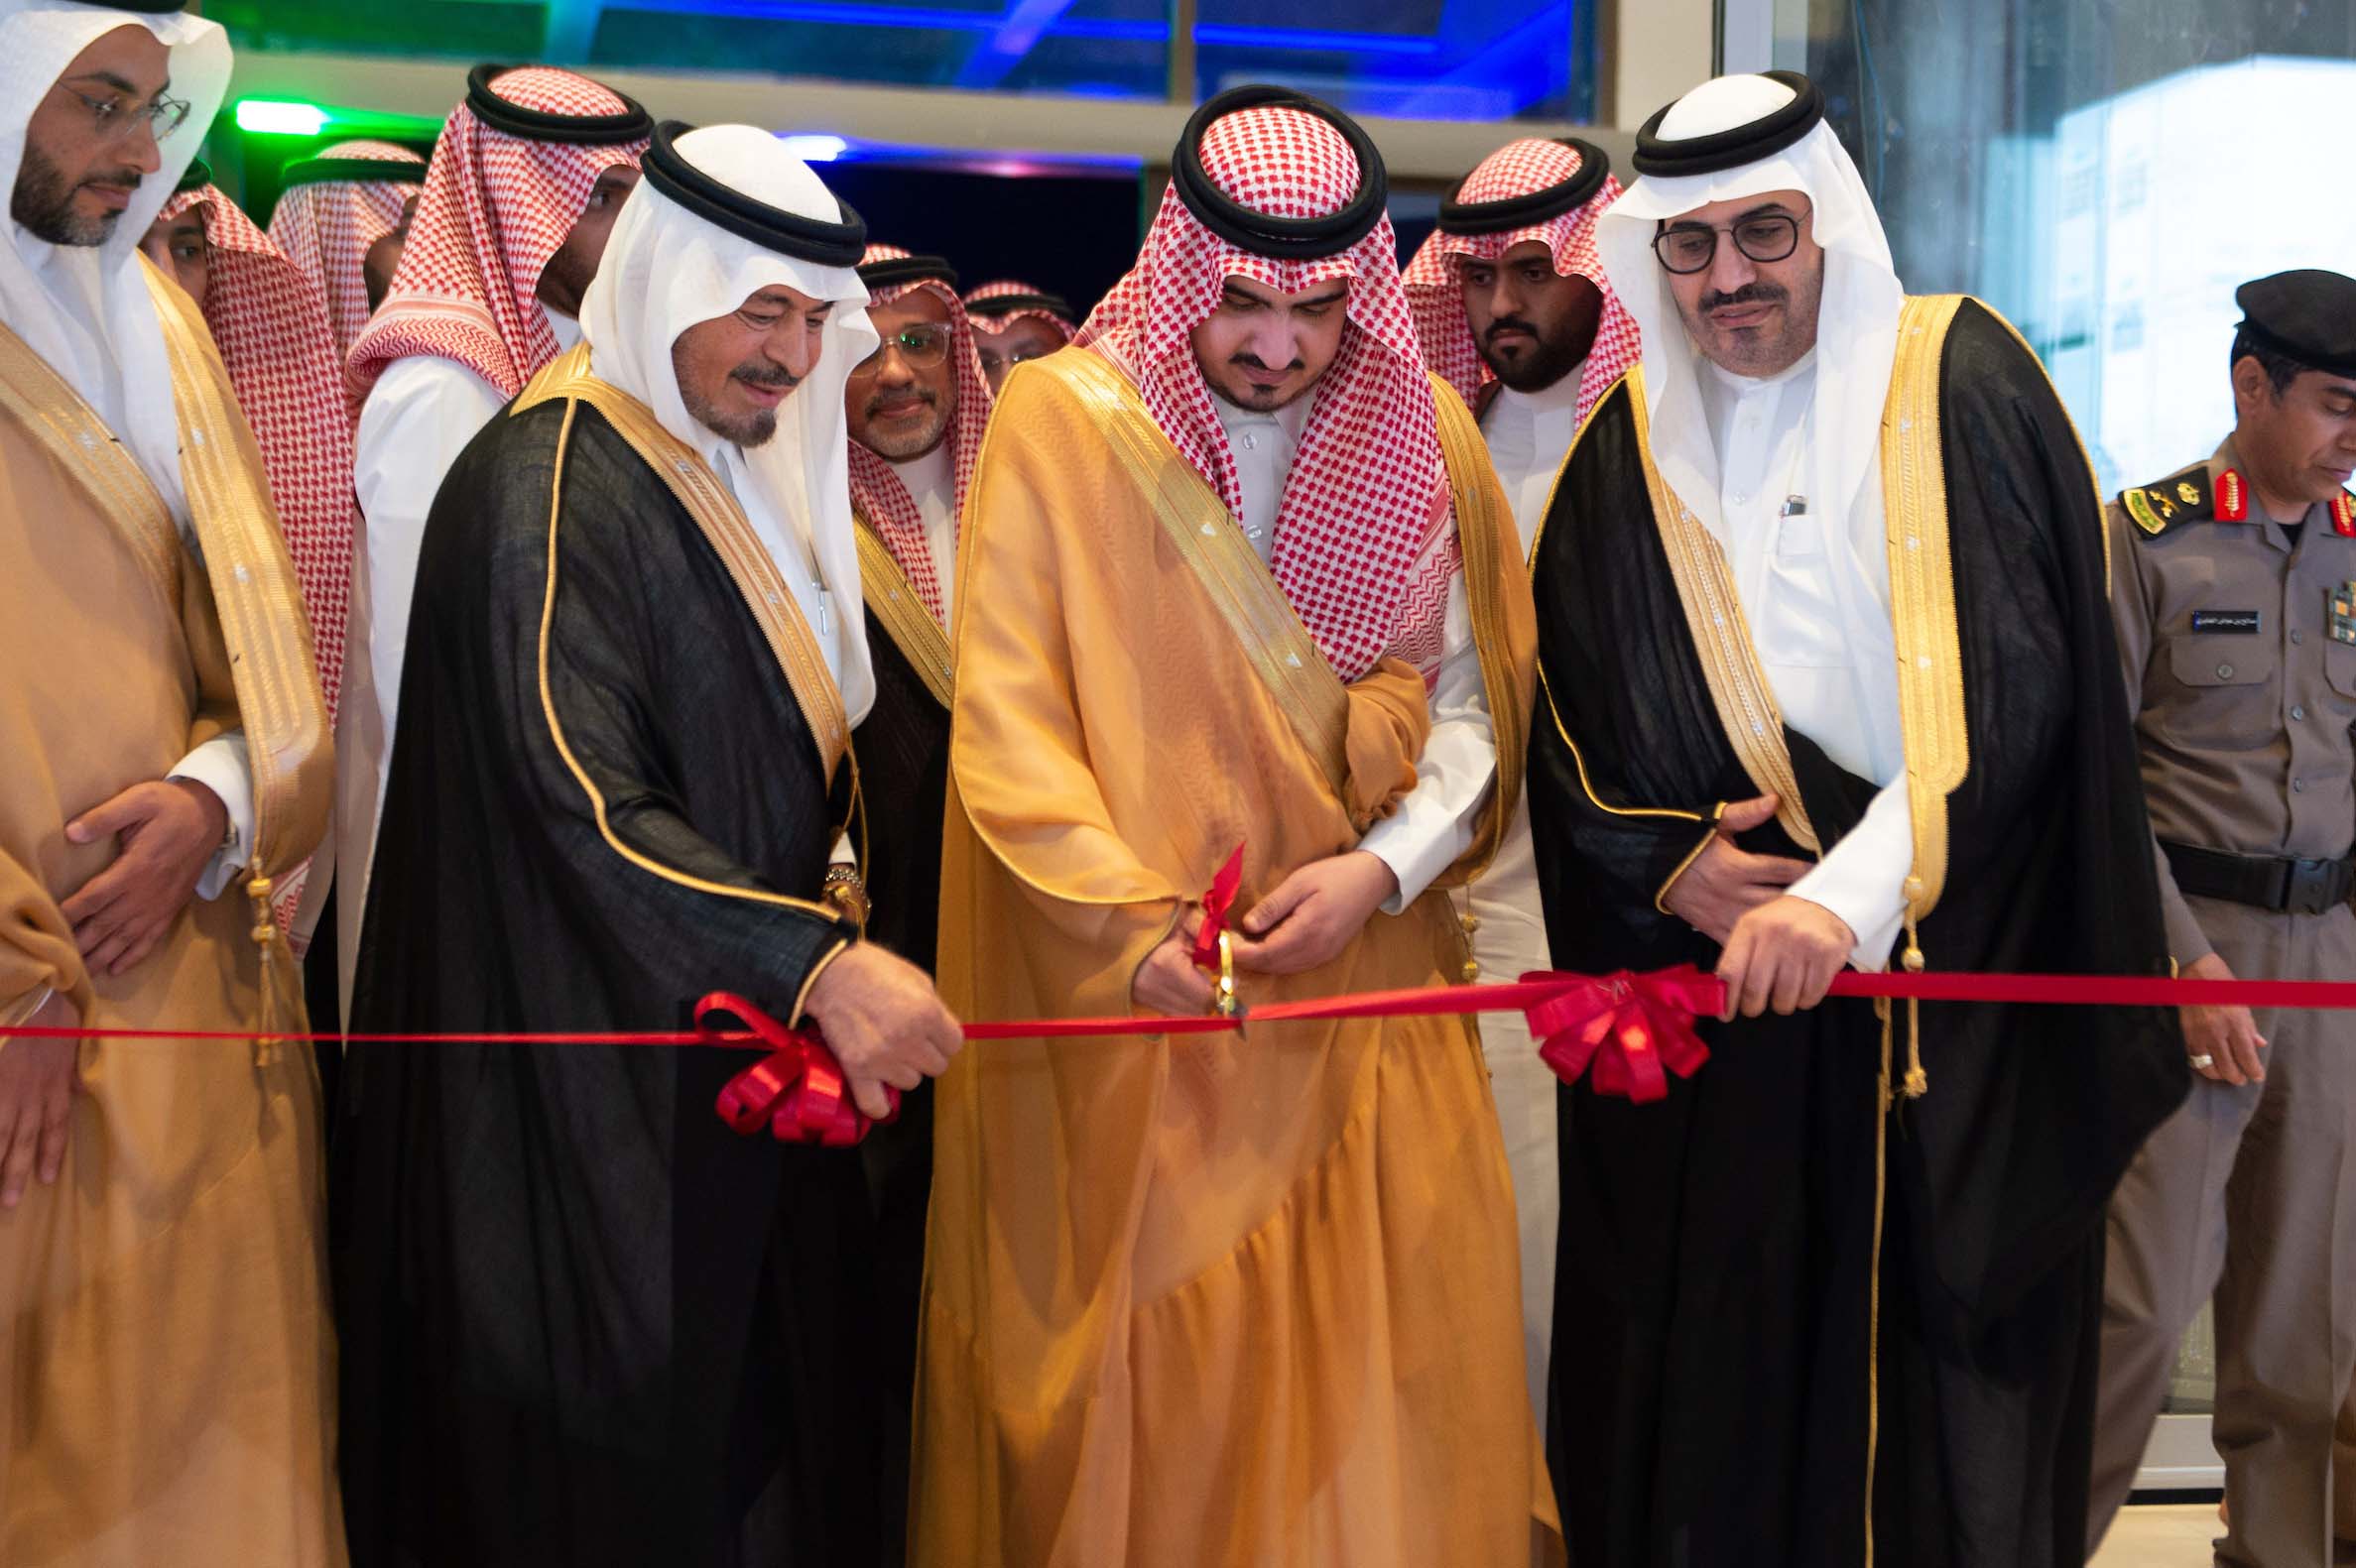 Saudi German Health celebrates the official opening of its latest hospital in Makkah